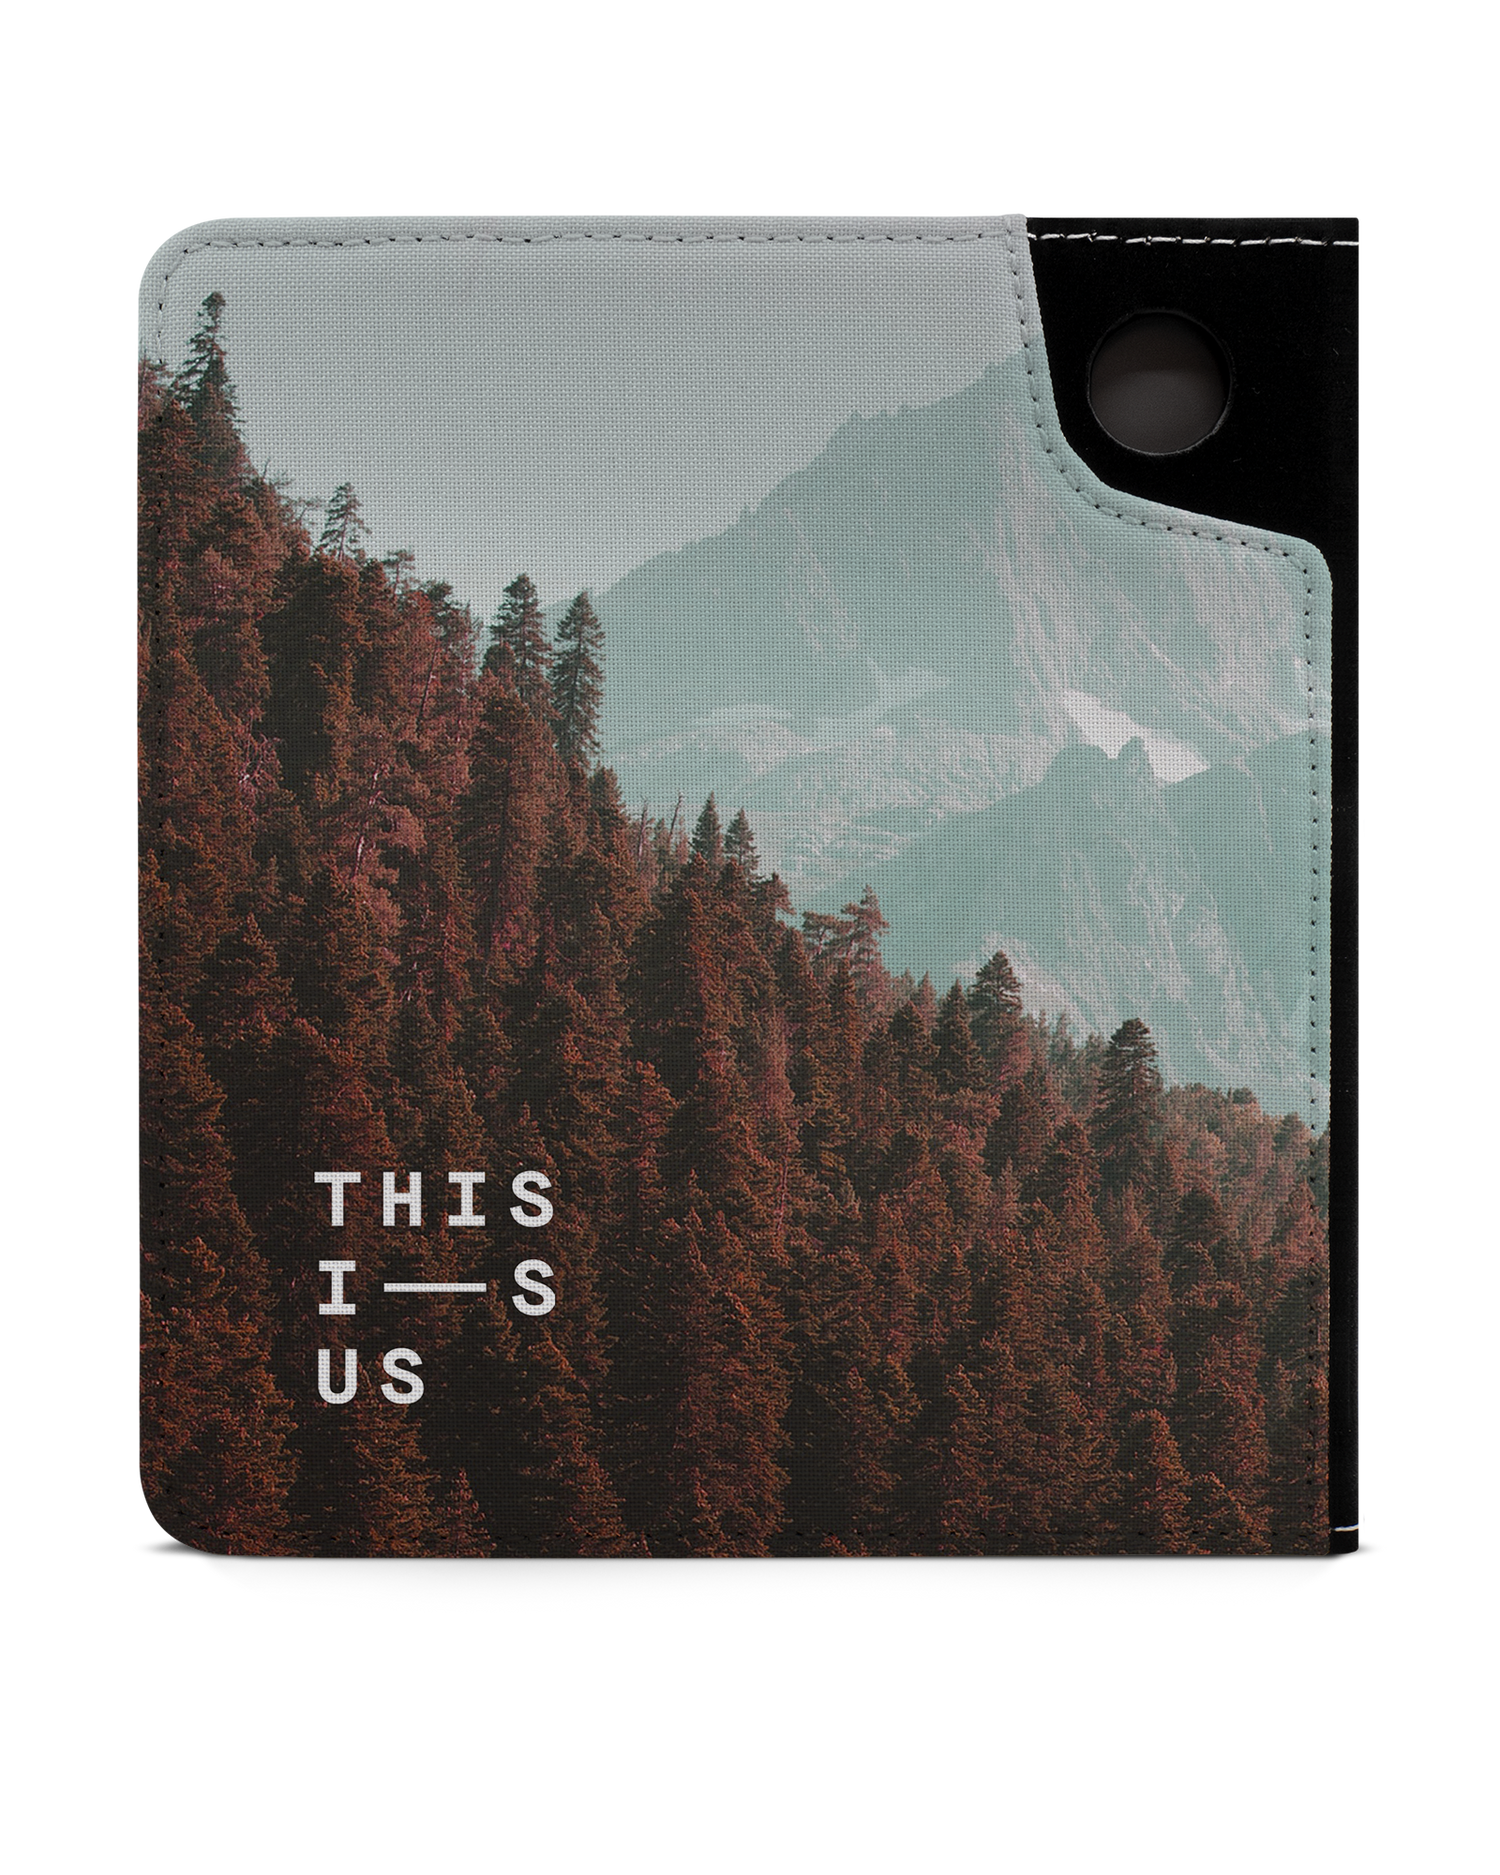 Into the Woods eReader Case for tolino vision 6: Back View